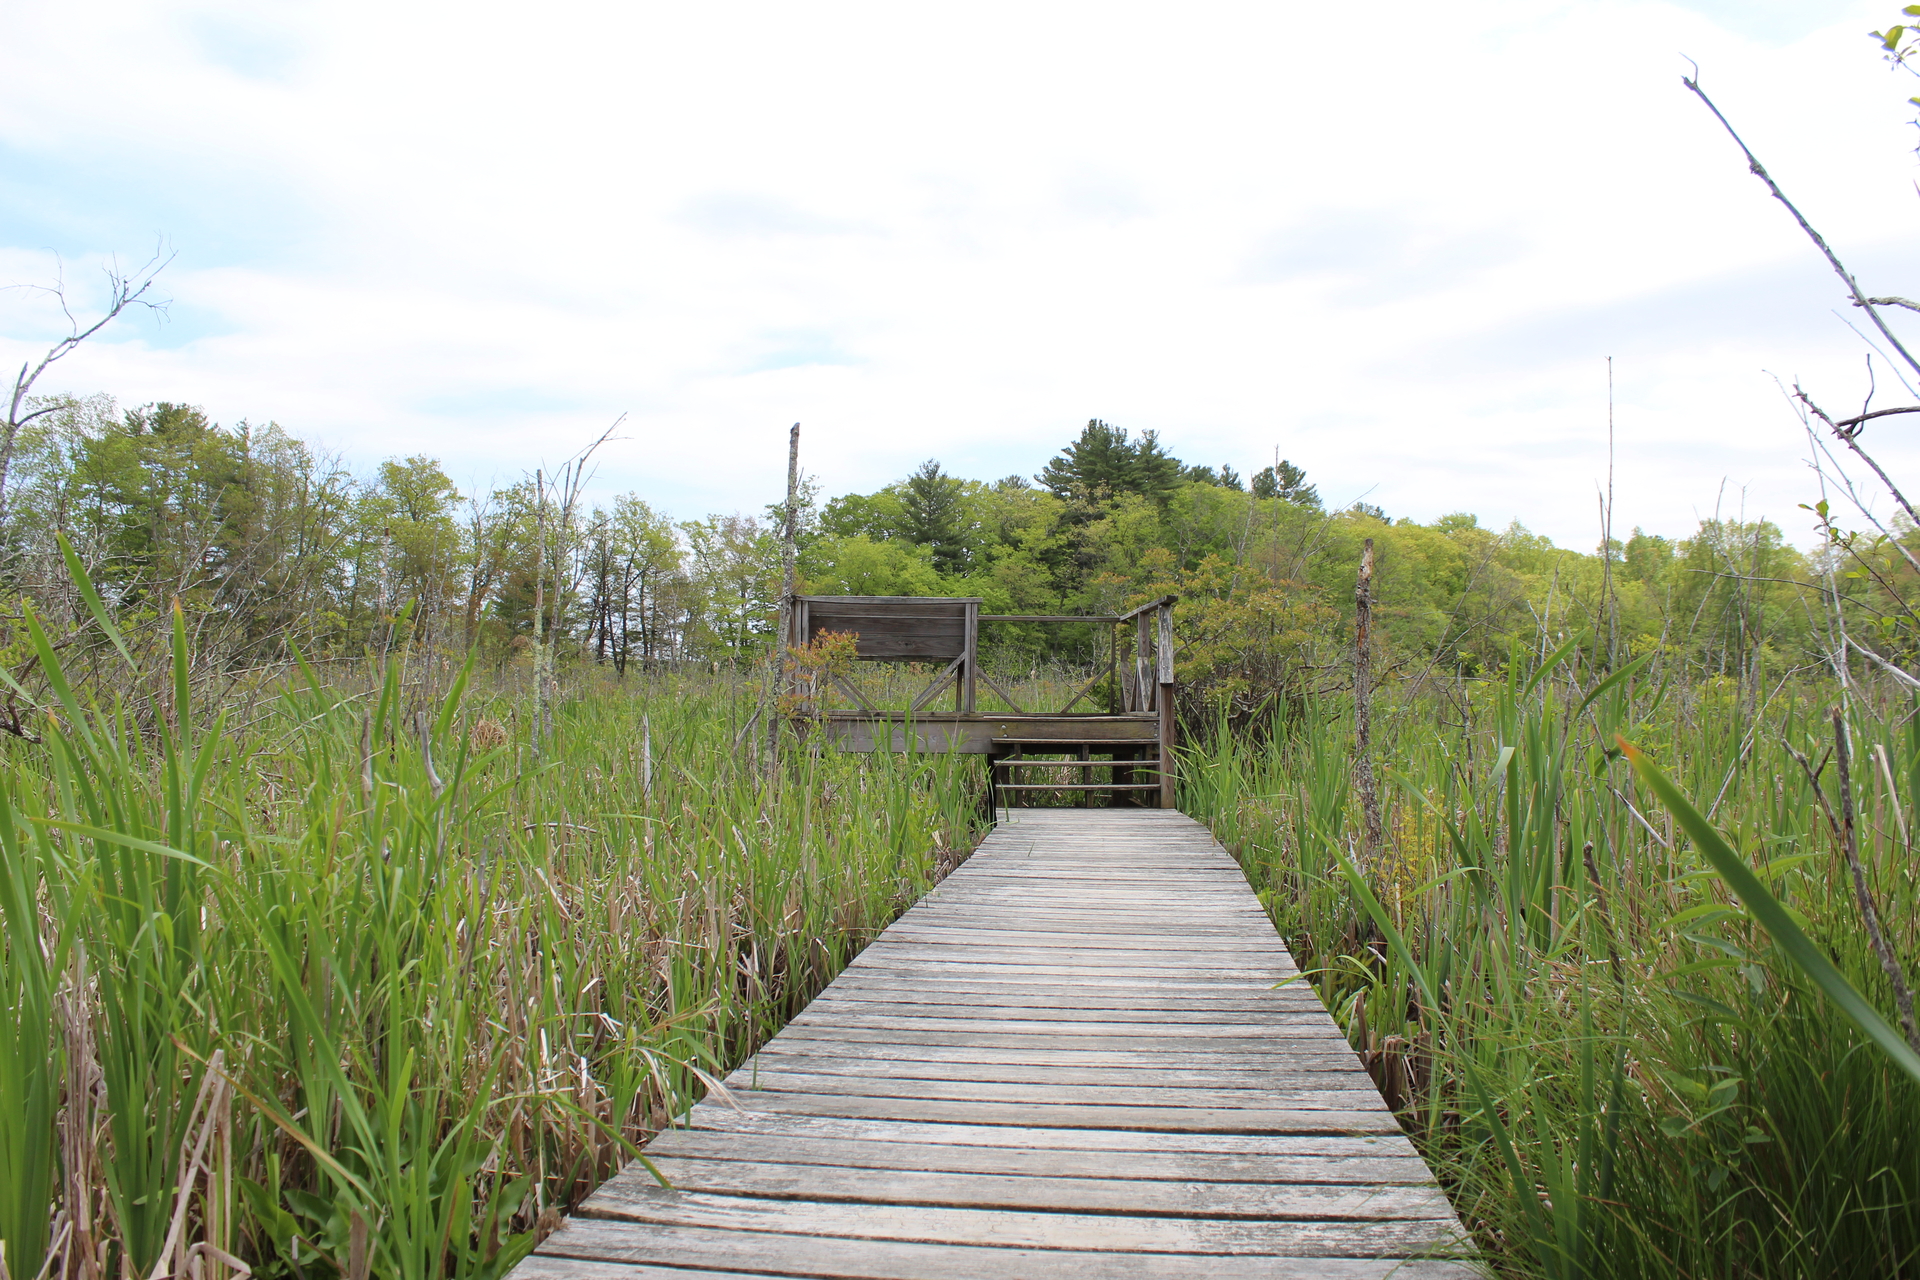 Wooden boardwalk in a marshy area leading to a slightly elevated overlook station to look out over marsh.